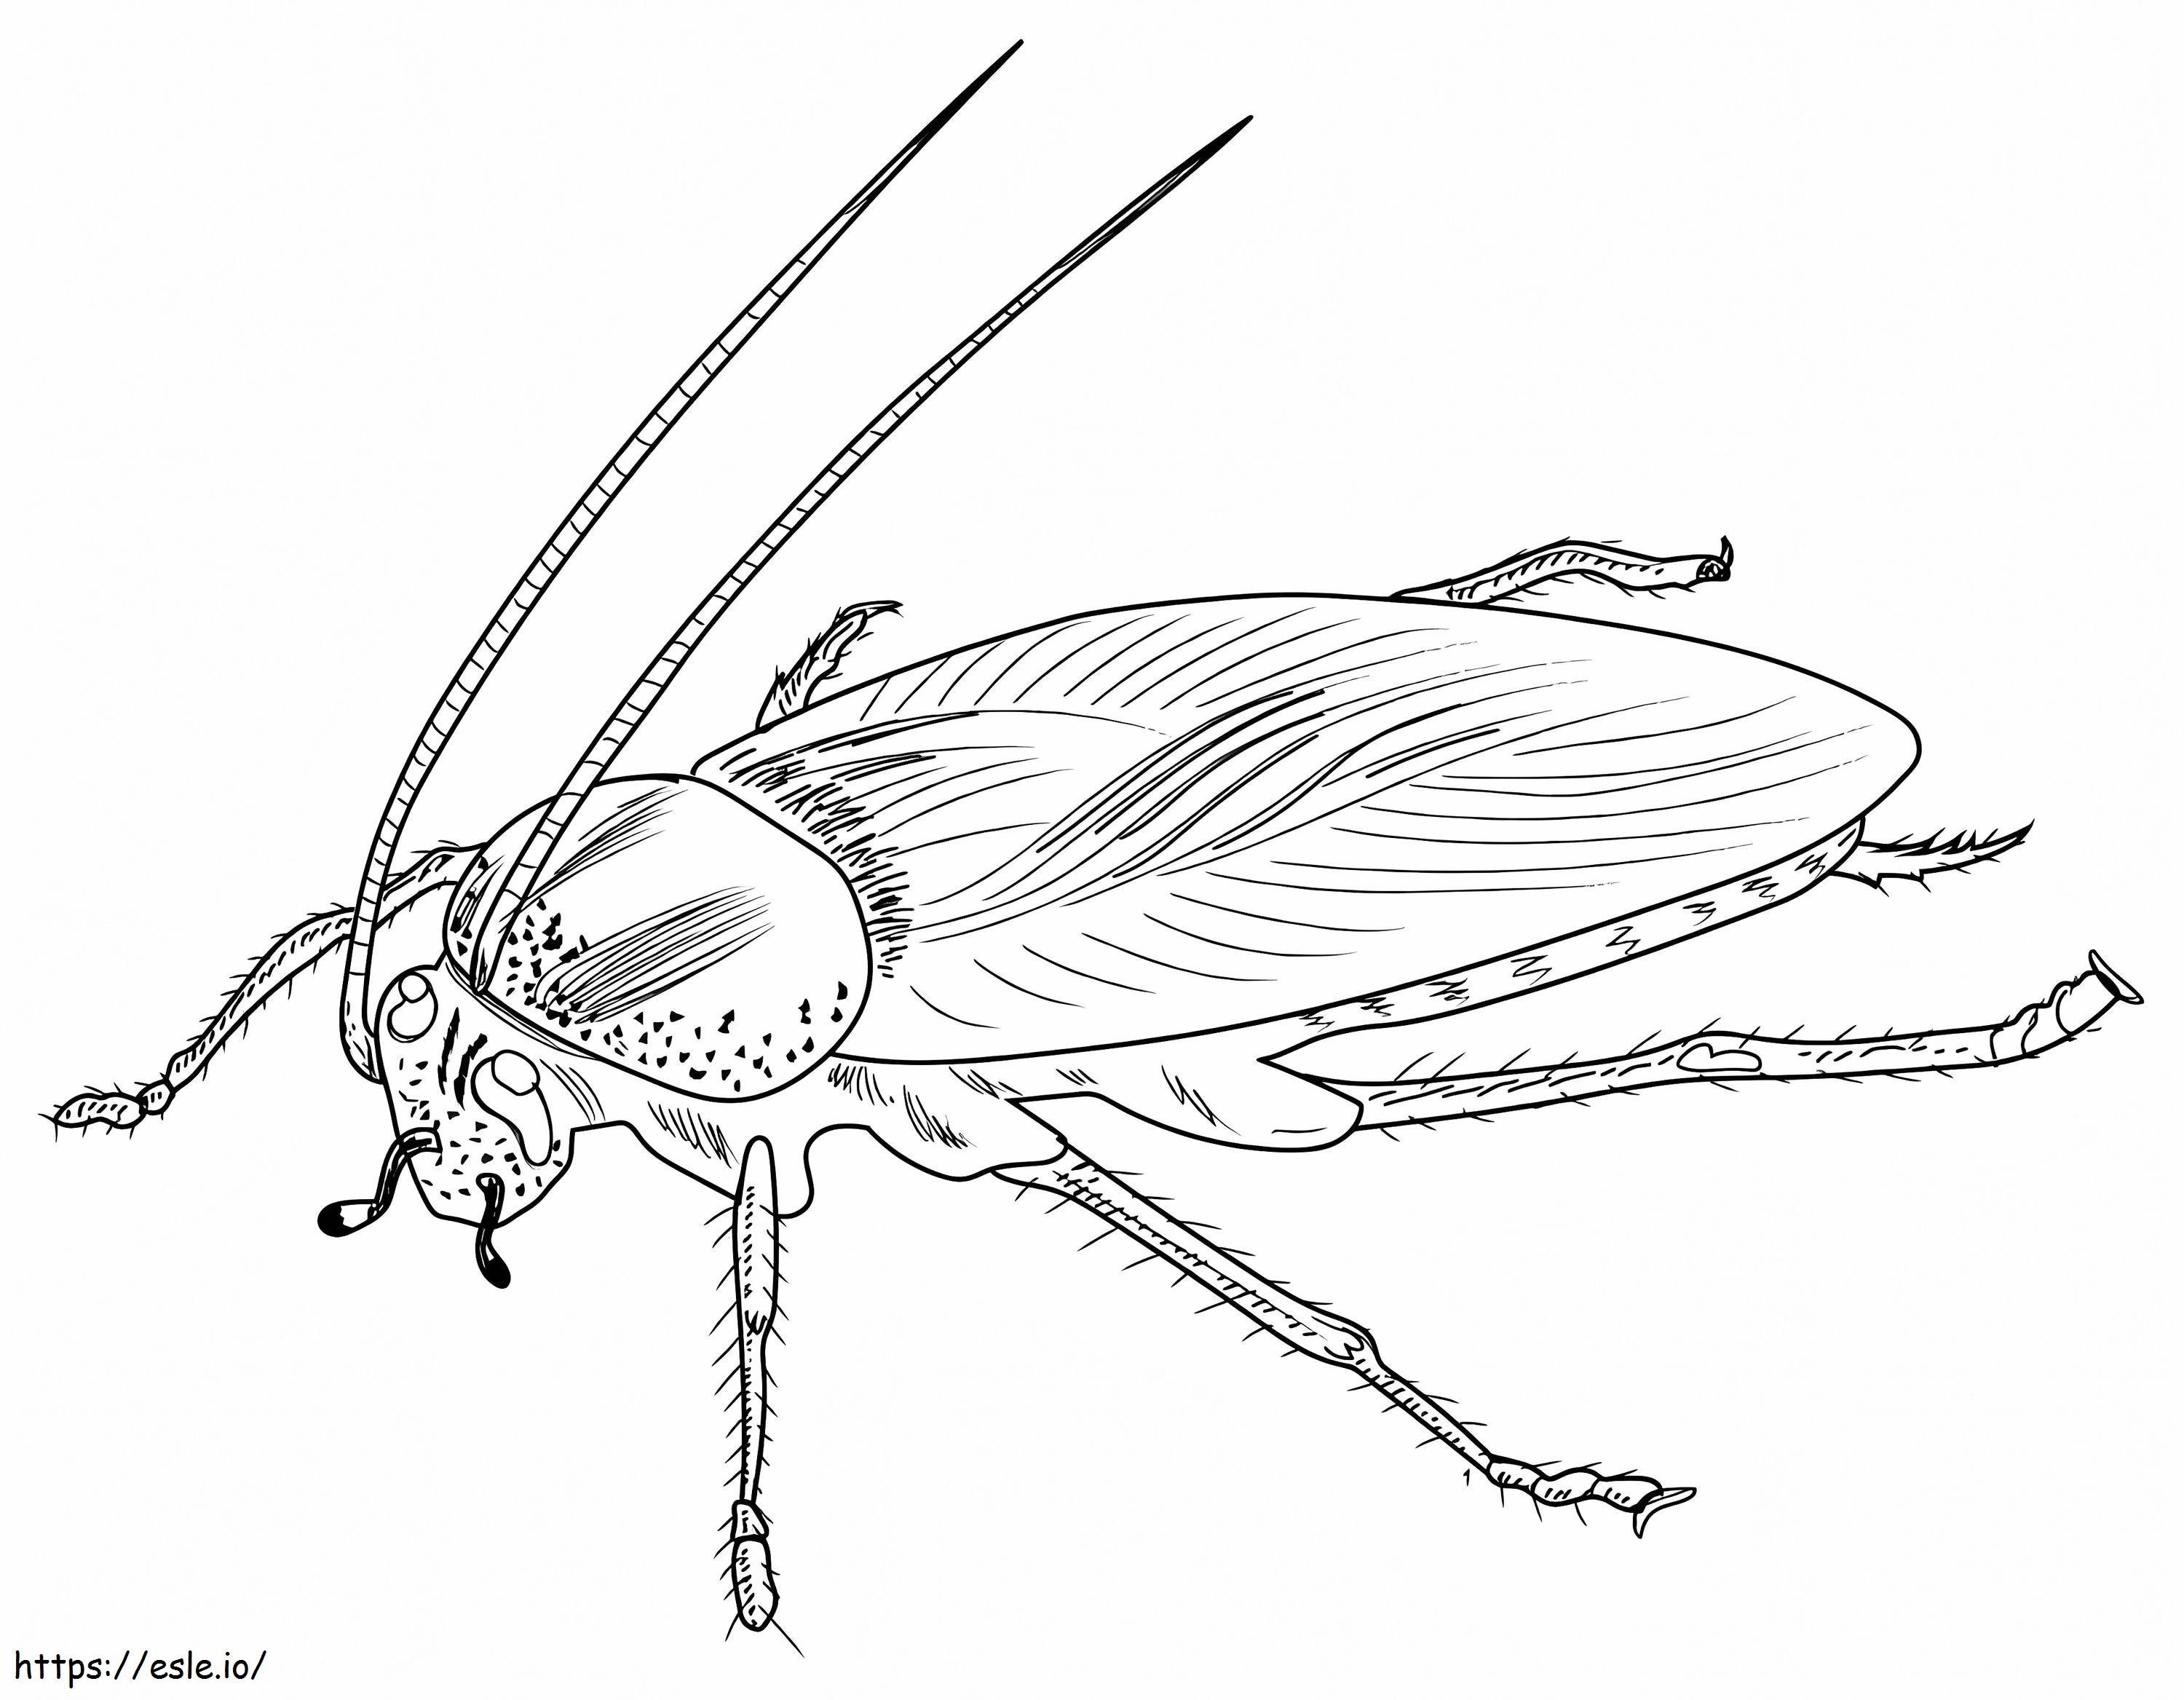 A German Cockroach coloring page